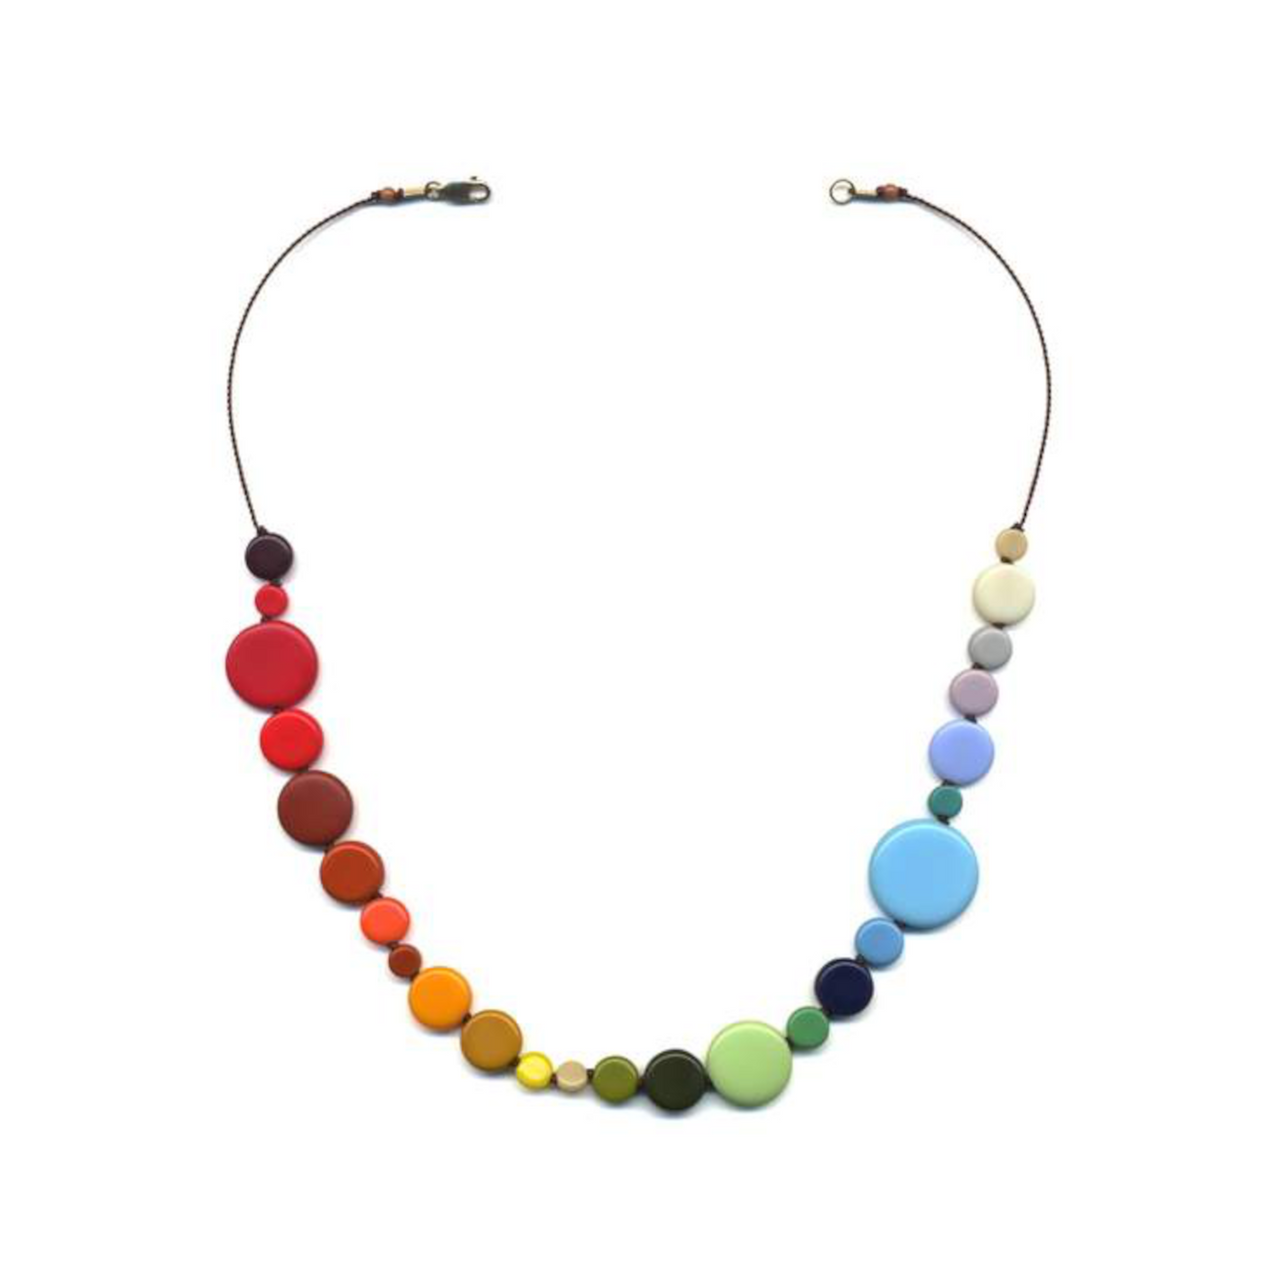 Rainbow Dots necklace by I. Ronni Kappos available at tomfoolery London | www.tomfoolerylondon.co.uk